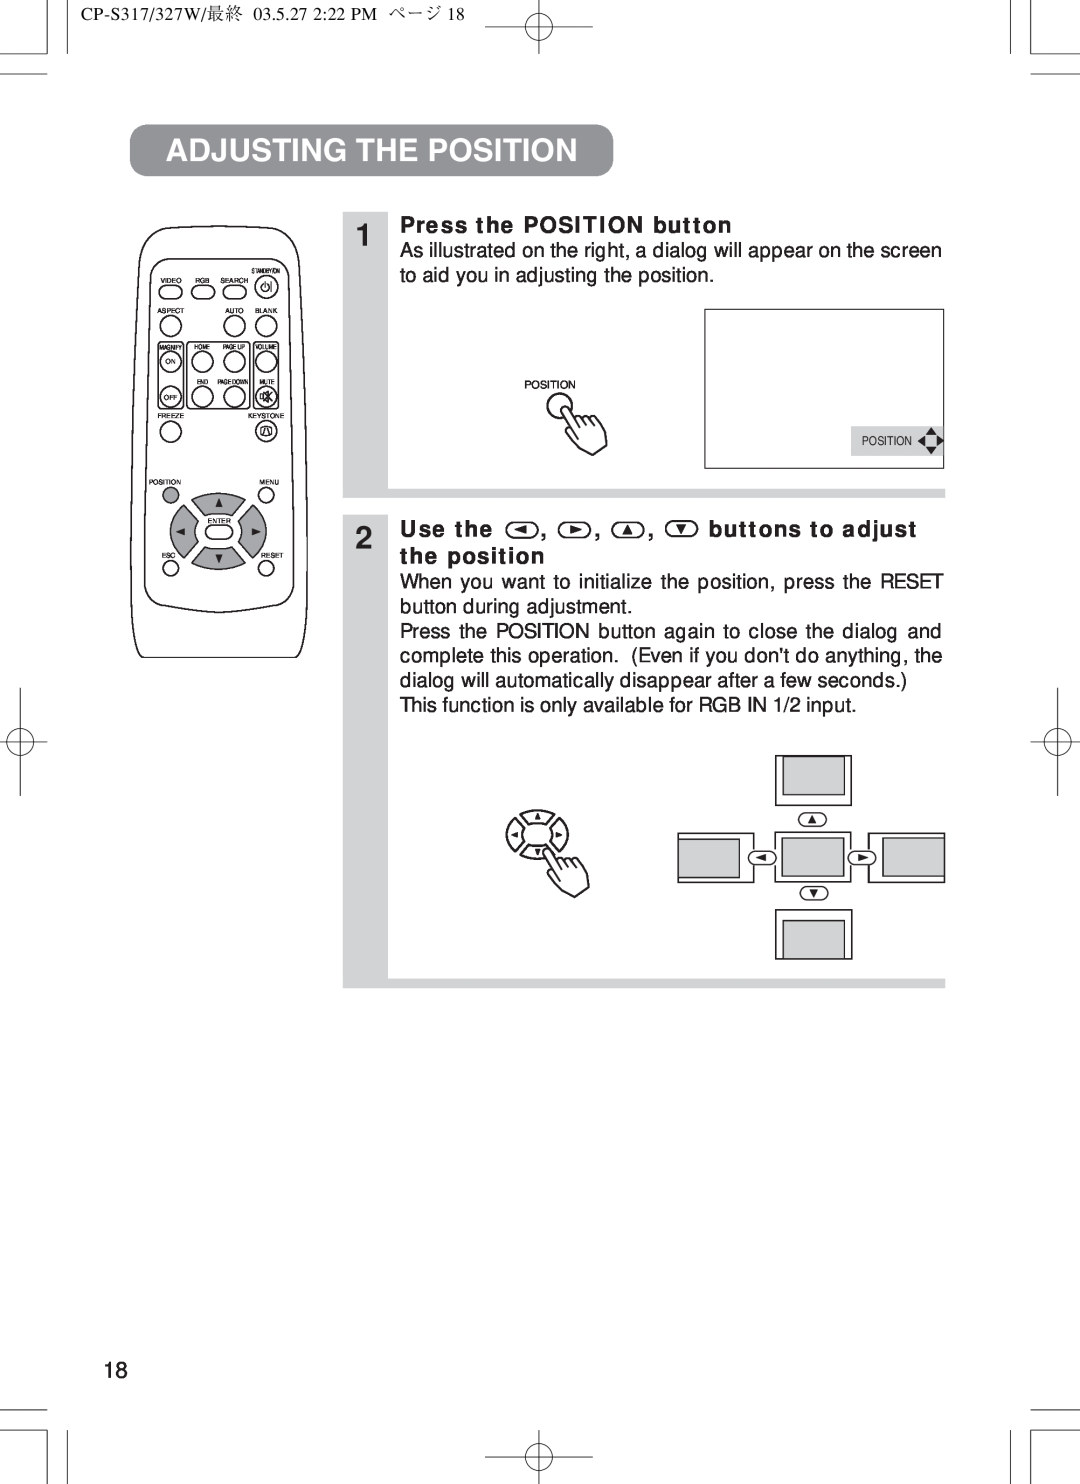 BOXLIGHT CP-322I user manual Adjusting The Position, Press the POSITION button, Use the, the position, buttons to adjust 